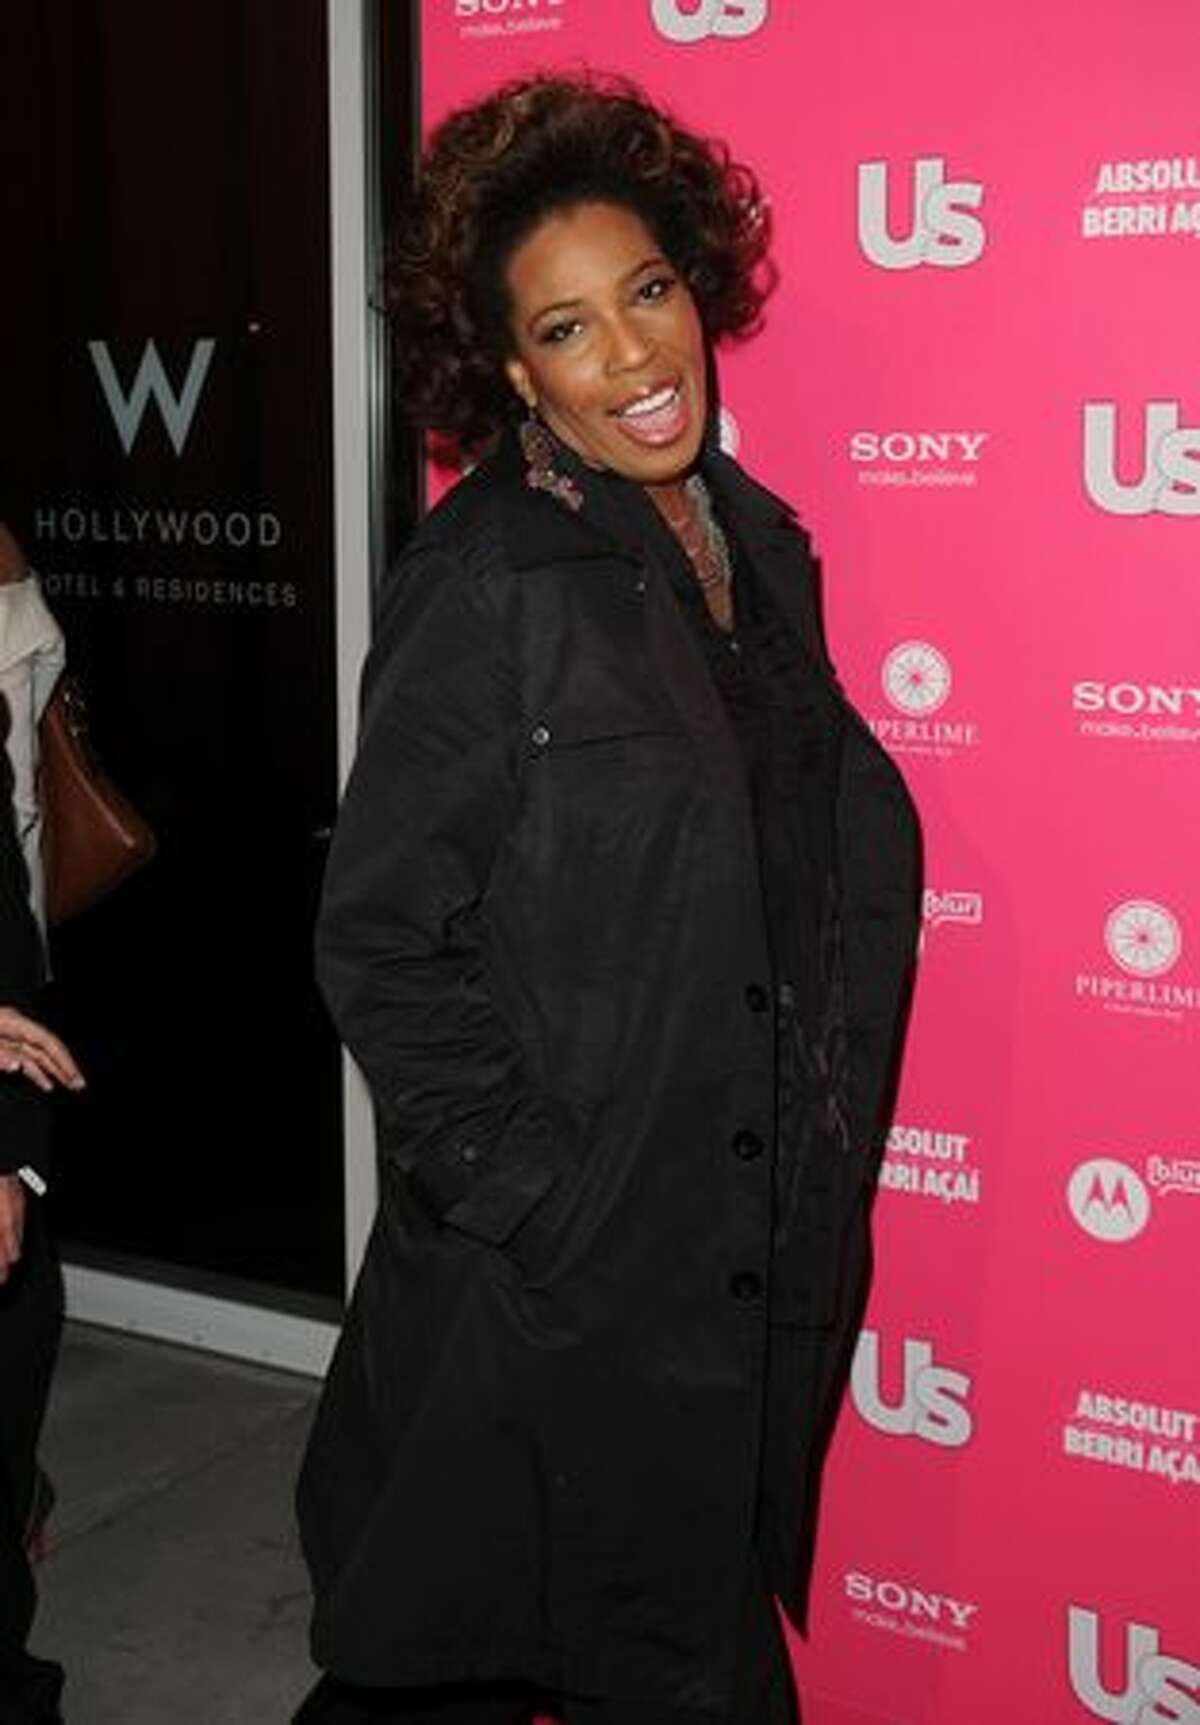 Singer Macy Gray arrives at the Us Weekly Hot Hollywood Style Issue celebration held at Drai's Hollywood at the W Hollywood Hotel in Hollywood, California.